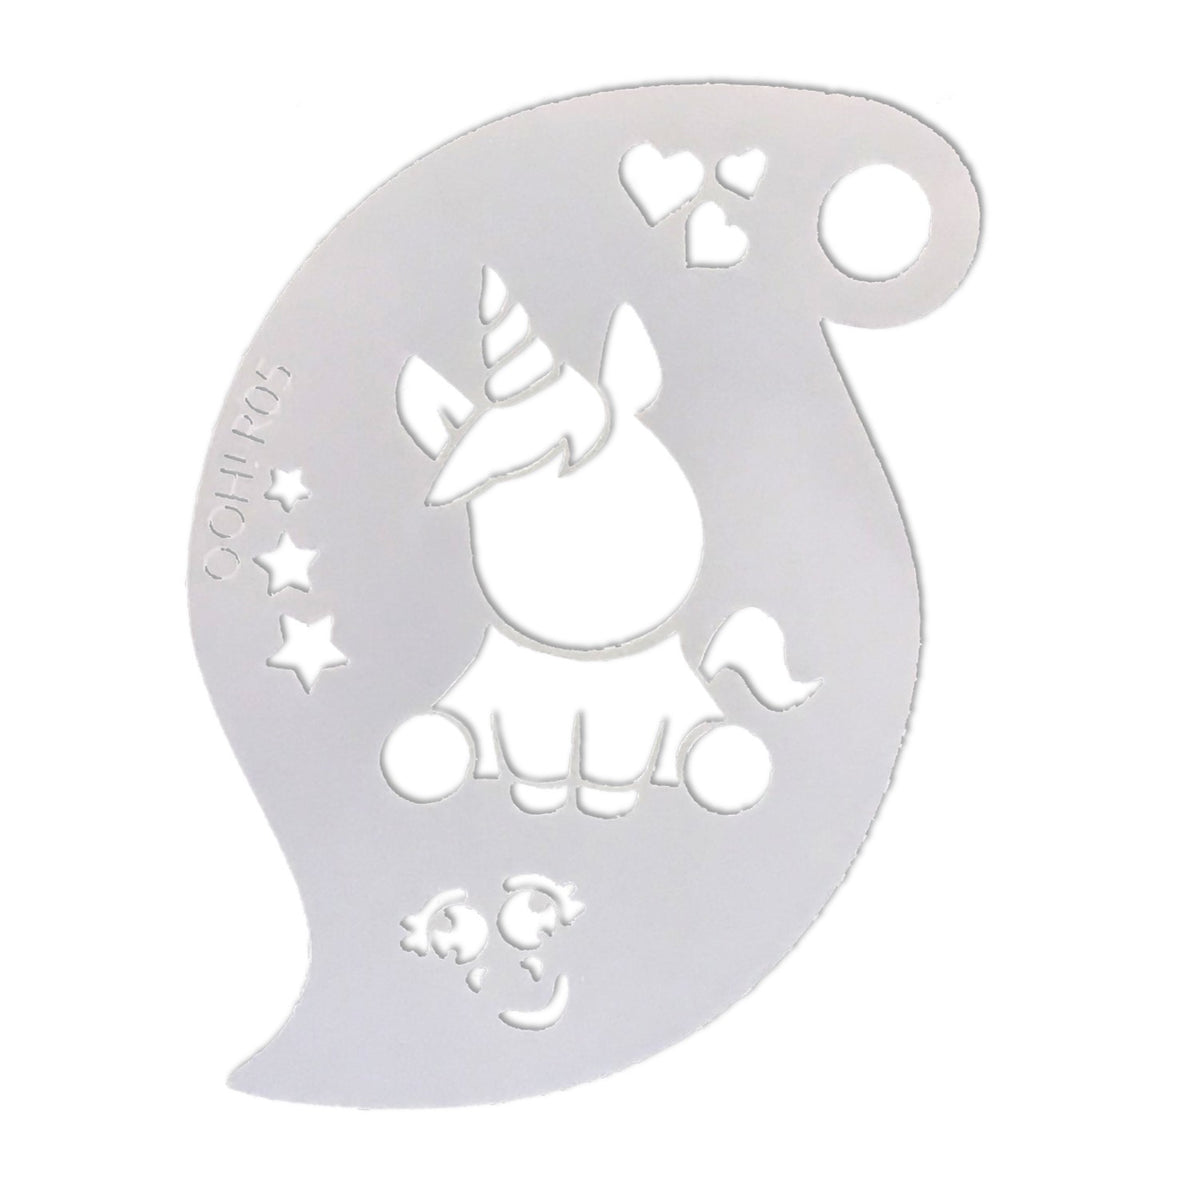 3 X Unicorn Face Painting Stencils Reusable Many Times Party